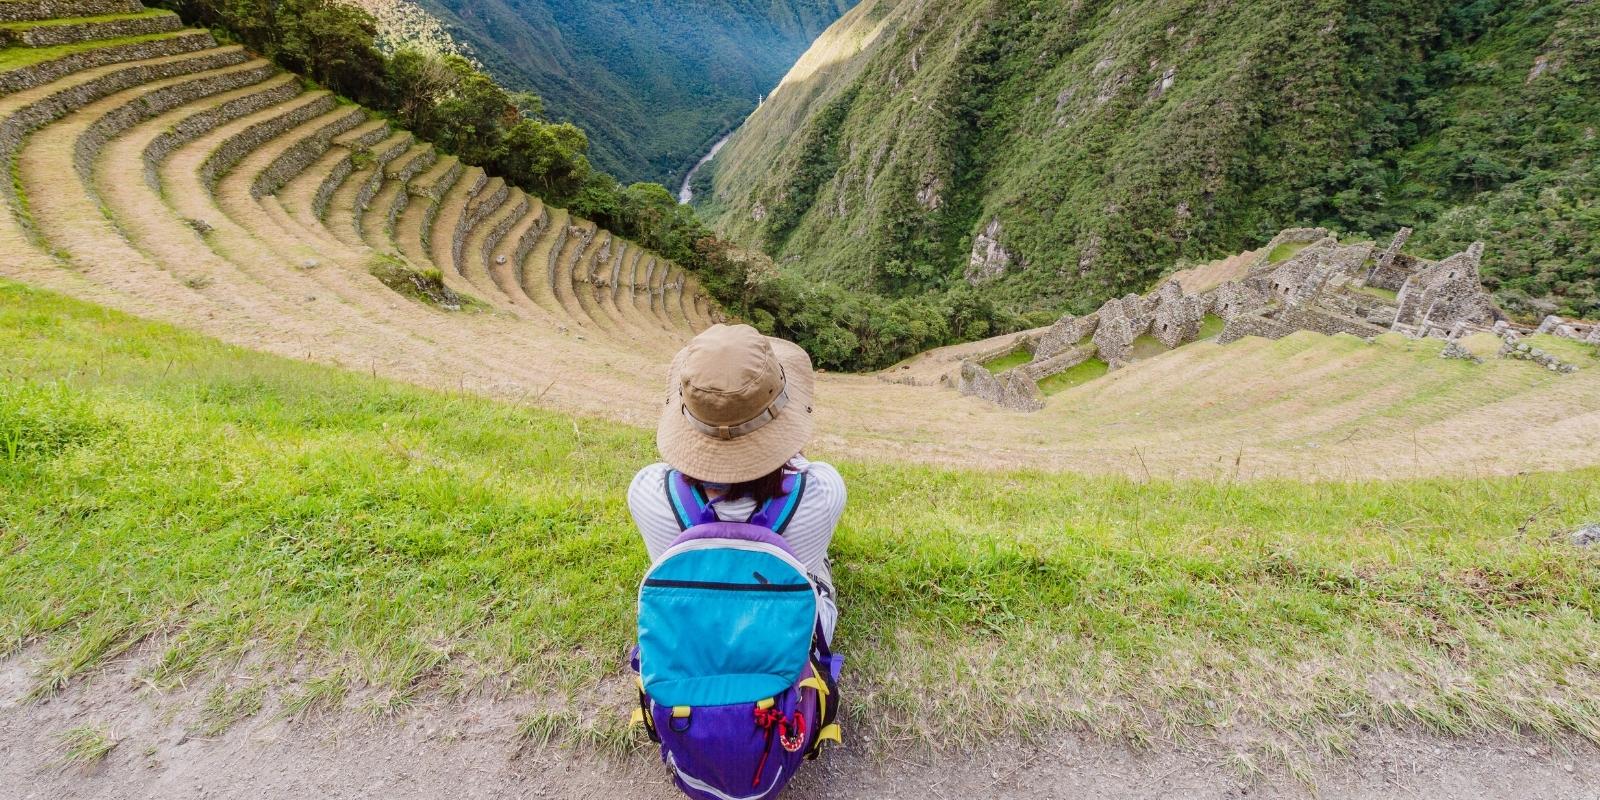 I NEED TRAVEL INSURANCE FOR THE SHORT  INCA TRAIL HIKE